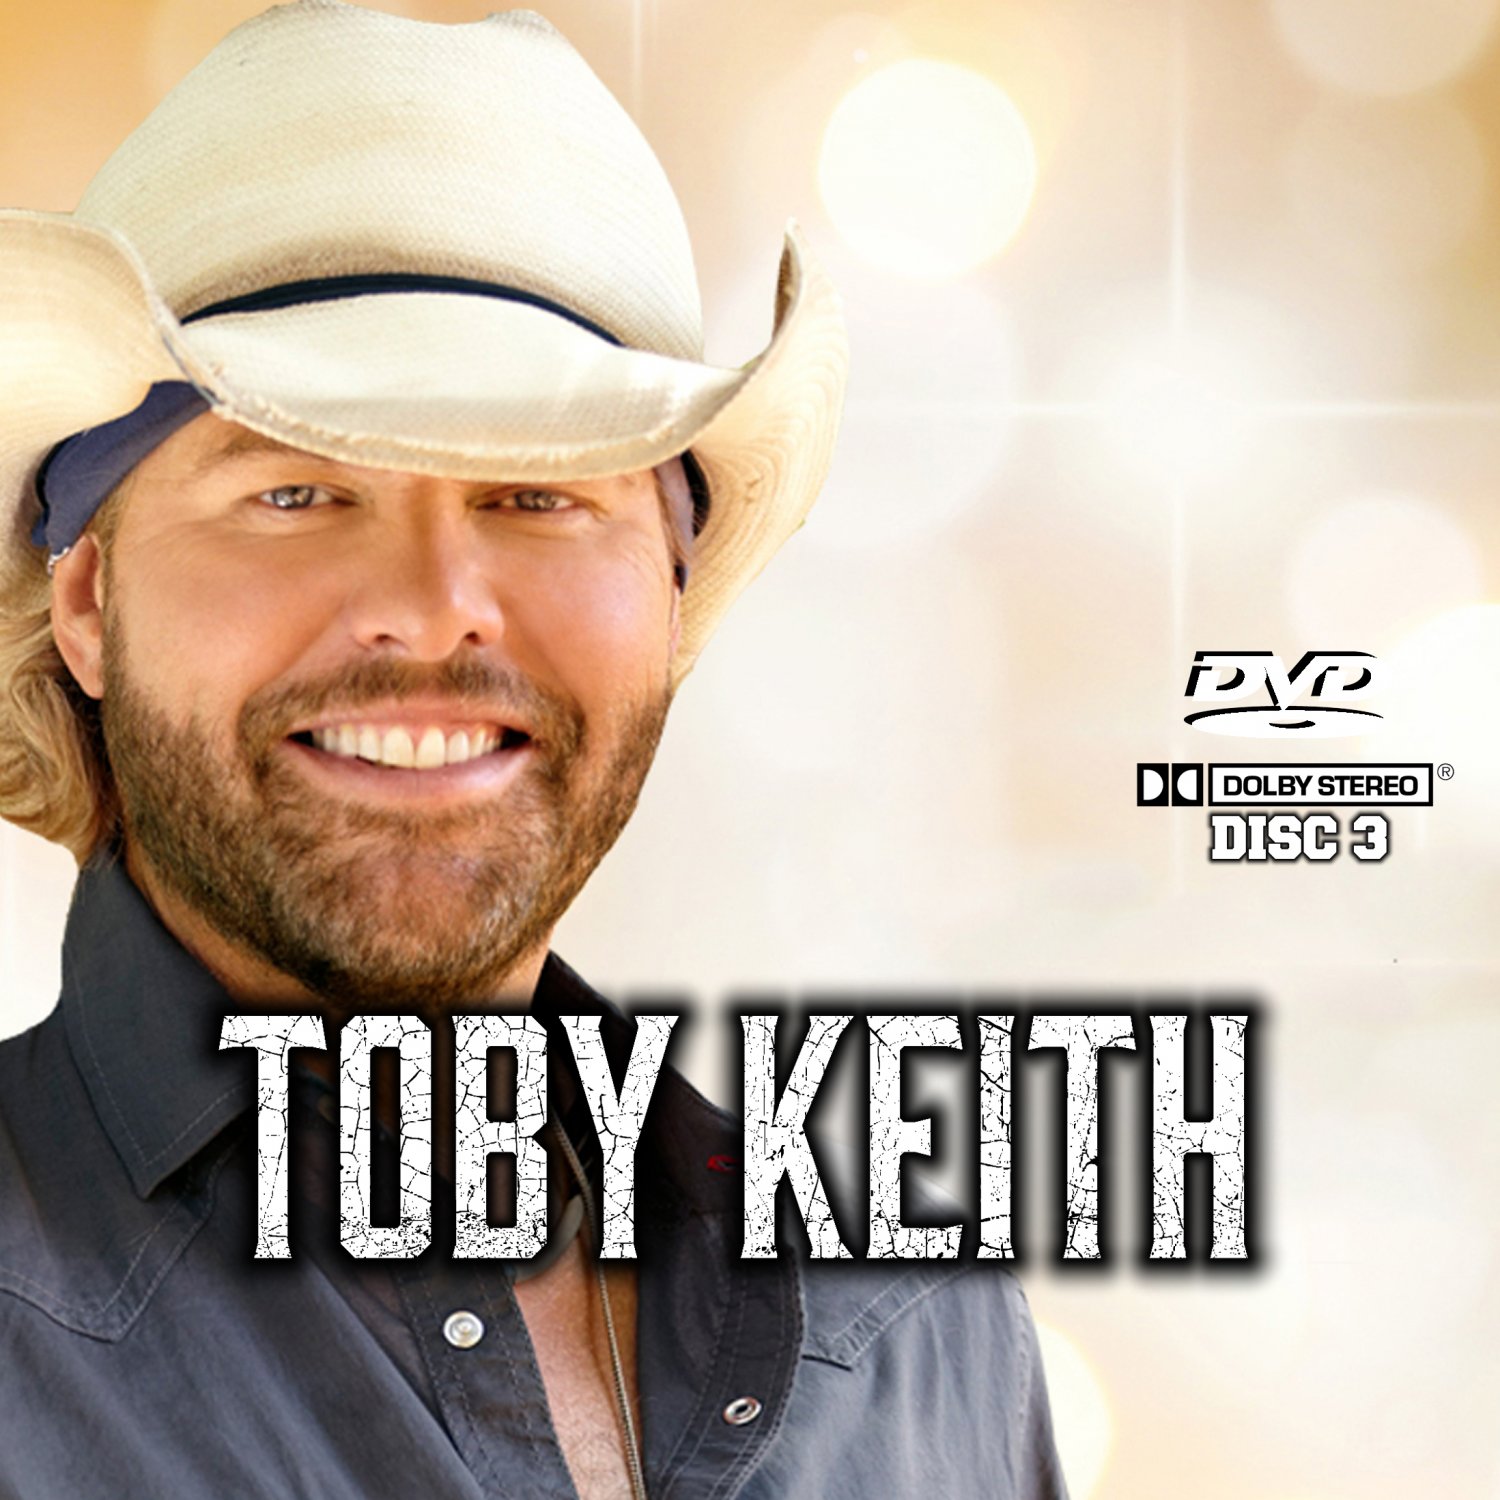 Toby Keith Music Videos Collection (3 DVD's) 58 Music Videos